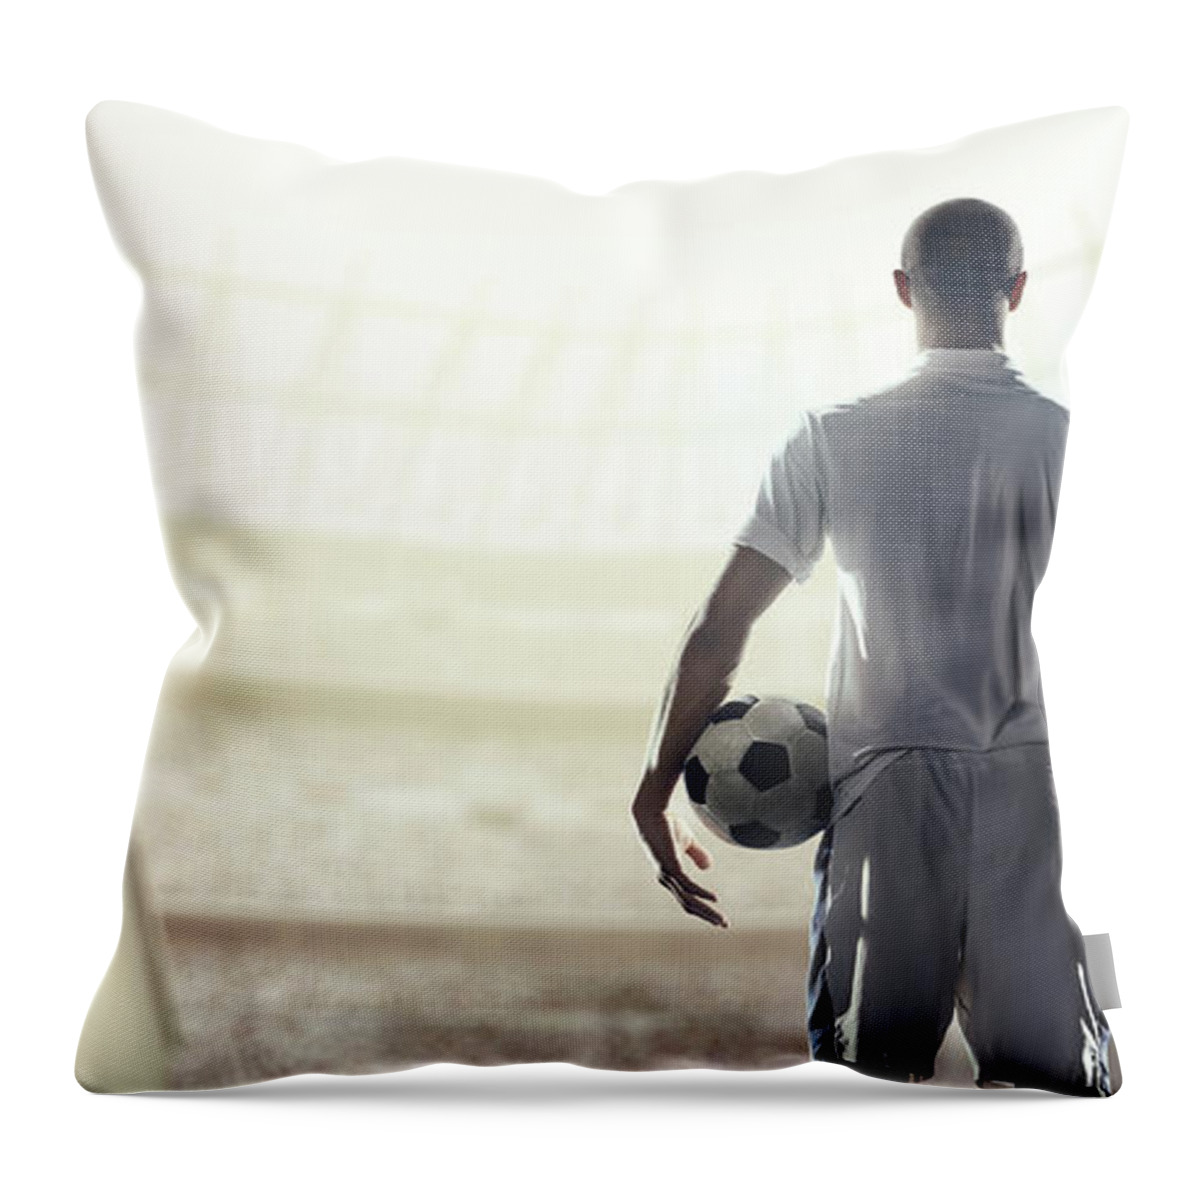 Event Throw Pillow featuring the photograph Black And White Photo Of A Soccer by Dmytro Aksonov